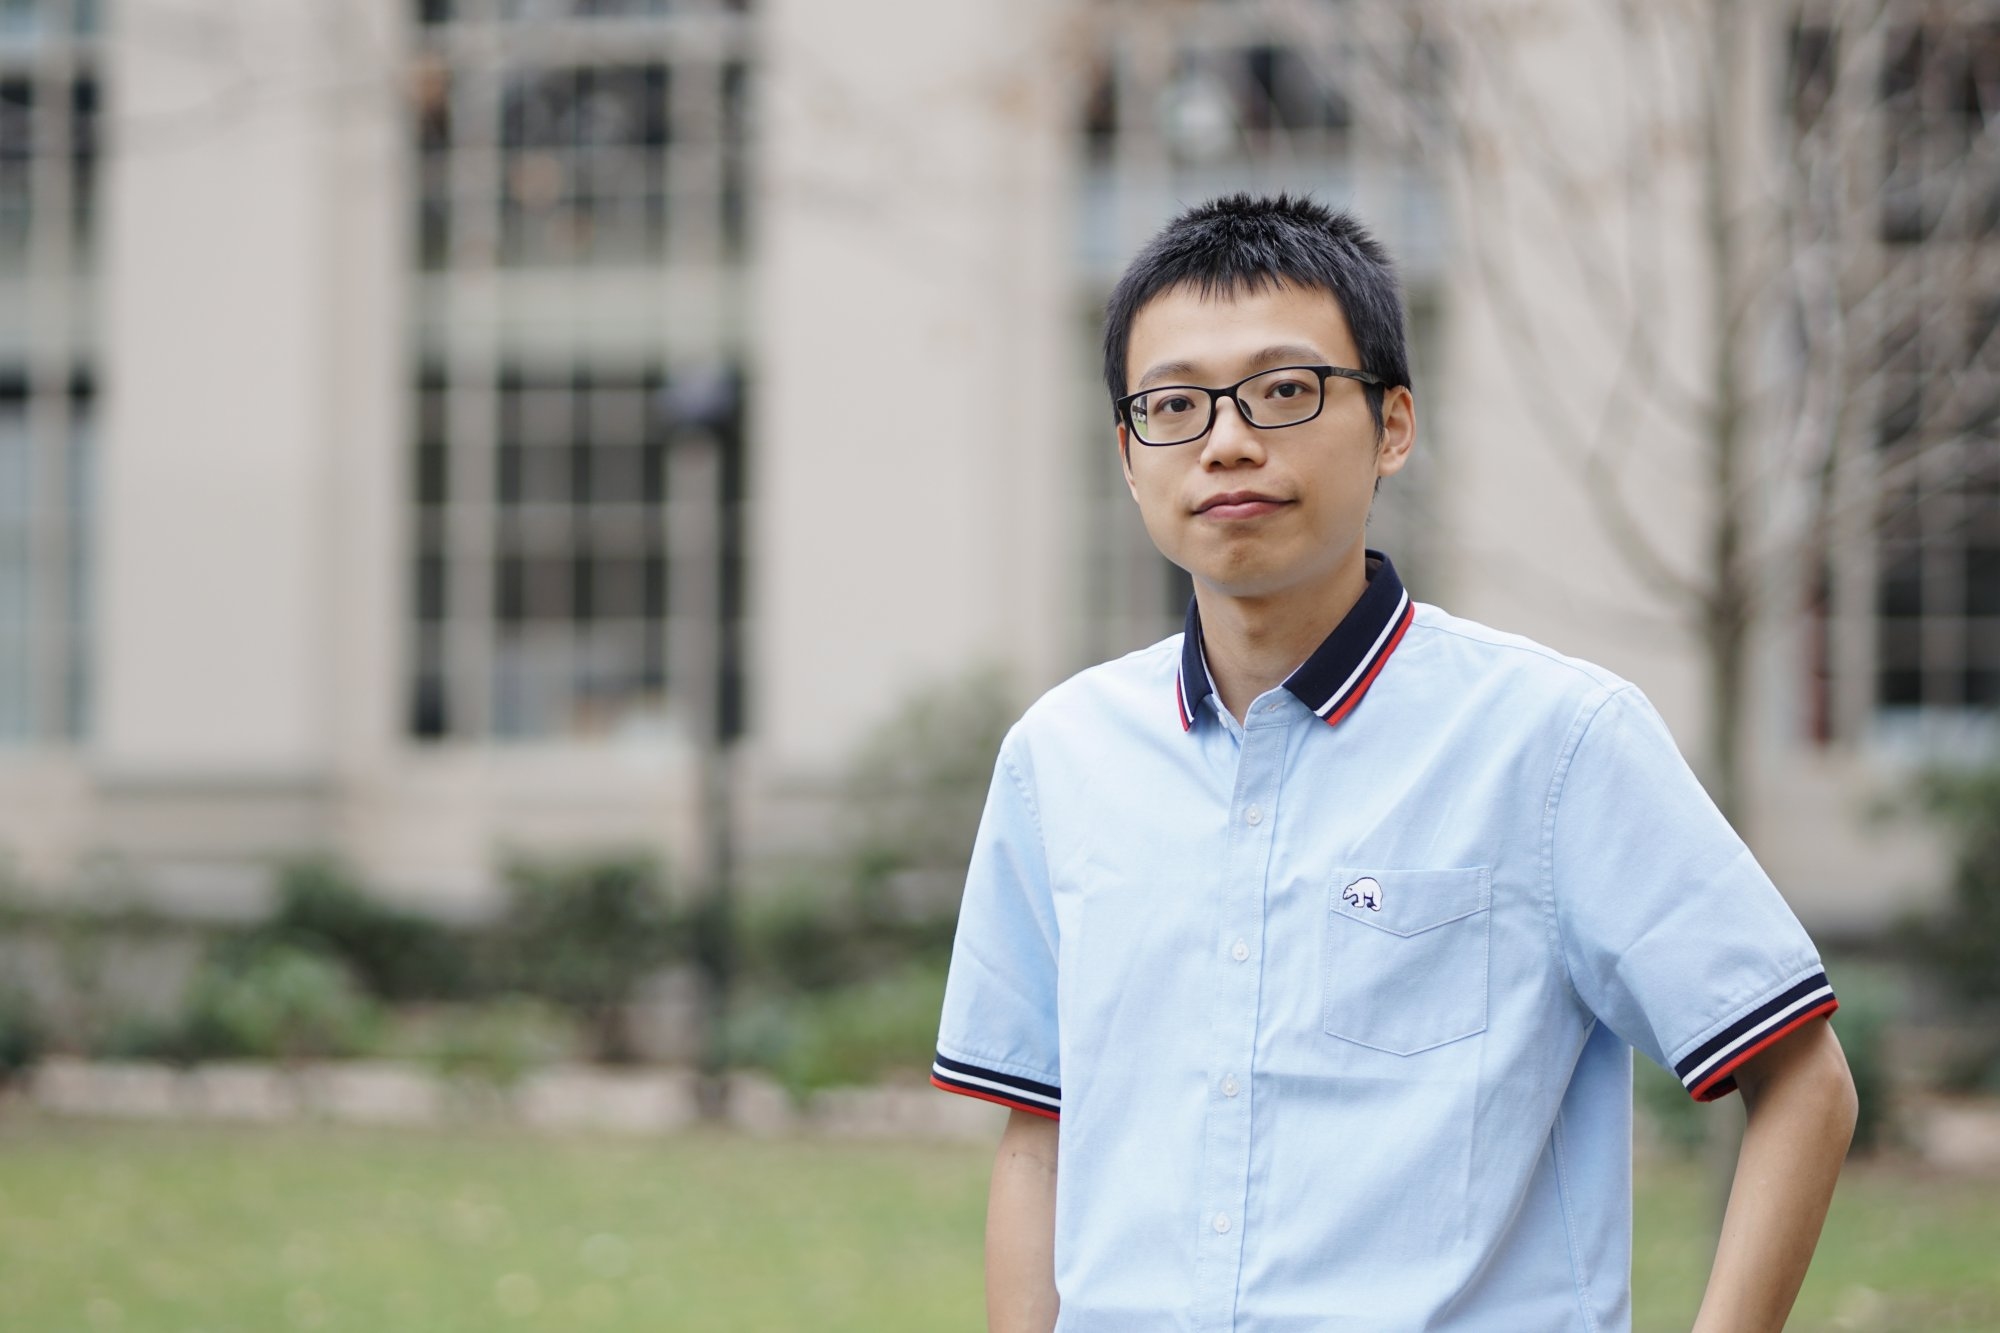 MIT Political Science student Hao Zhang studies the political economy of global production, state-business relations, applied statistical models, and formal political theory.